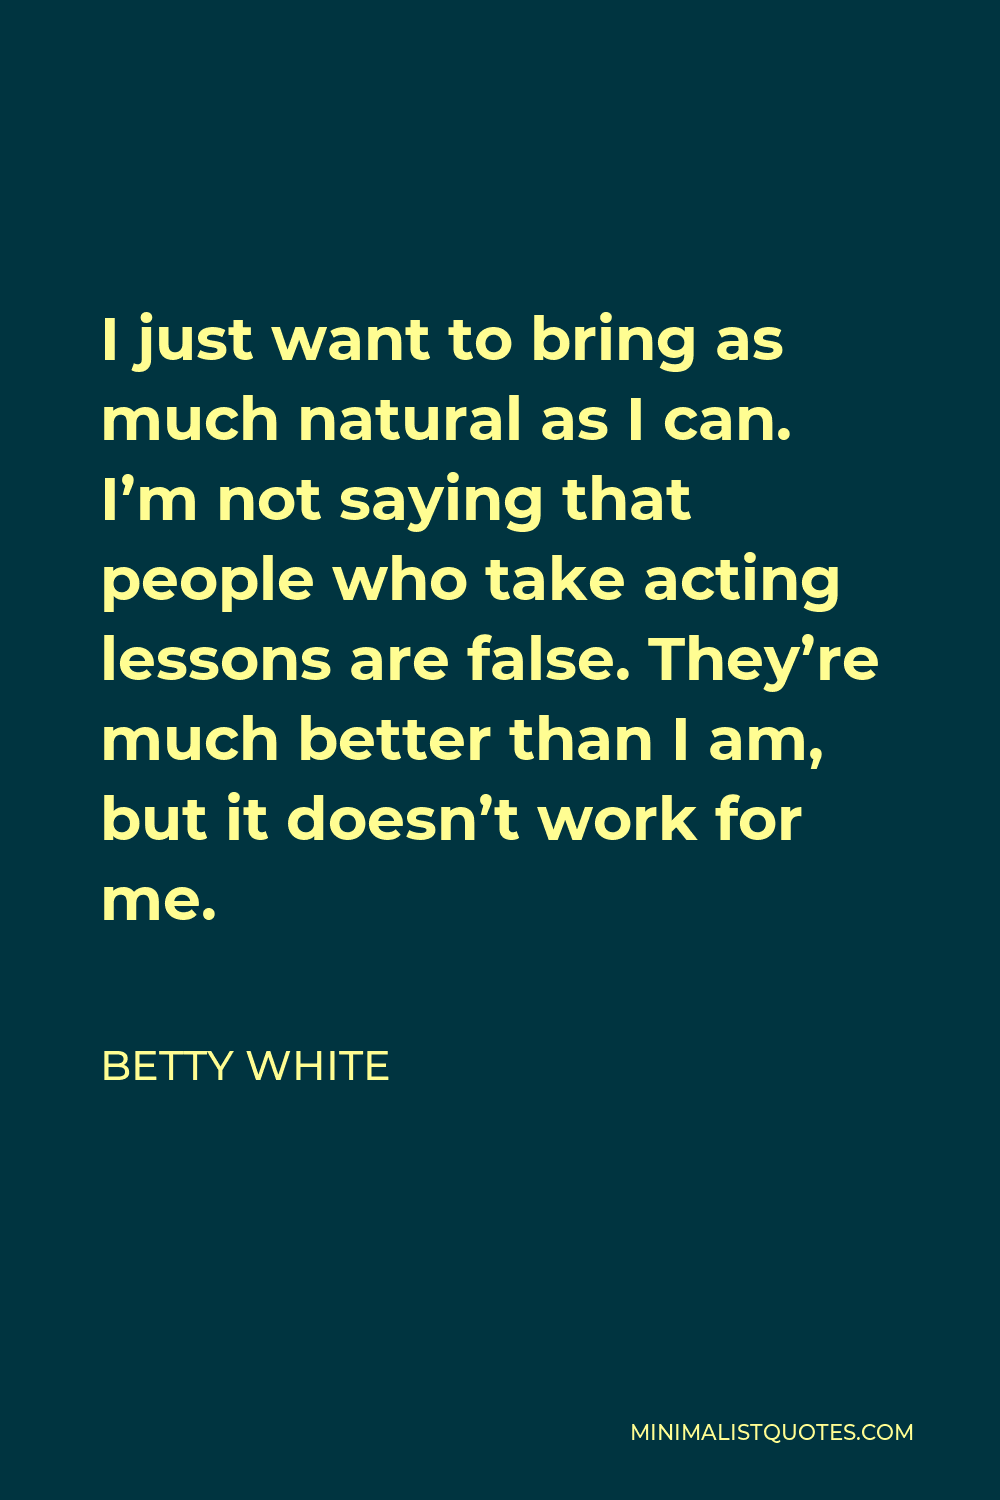 Betty White Quote - I just want to bring as much natural as I can. I’m not saying that people who take acting lessons are false. They’re much better than I am, but it doesn’t work for me.